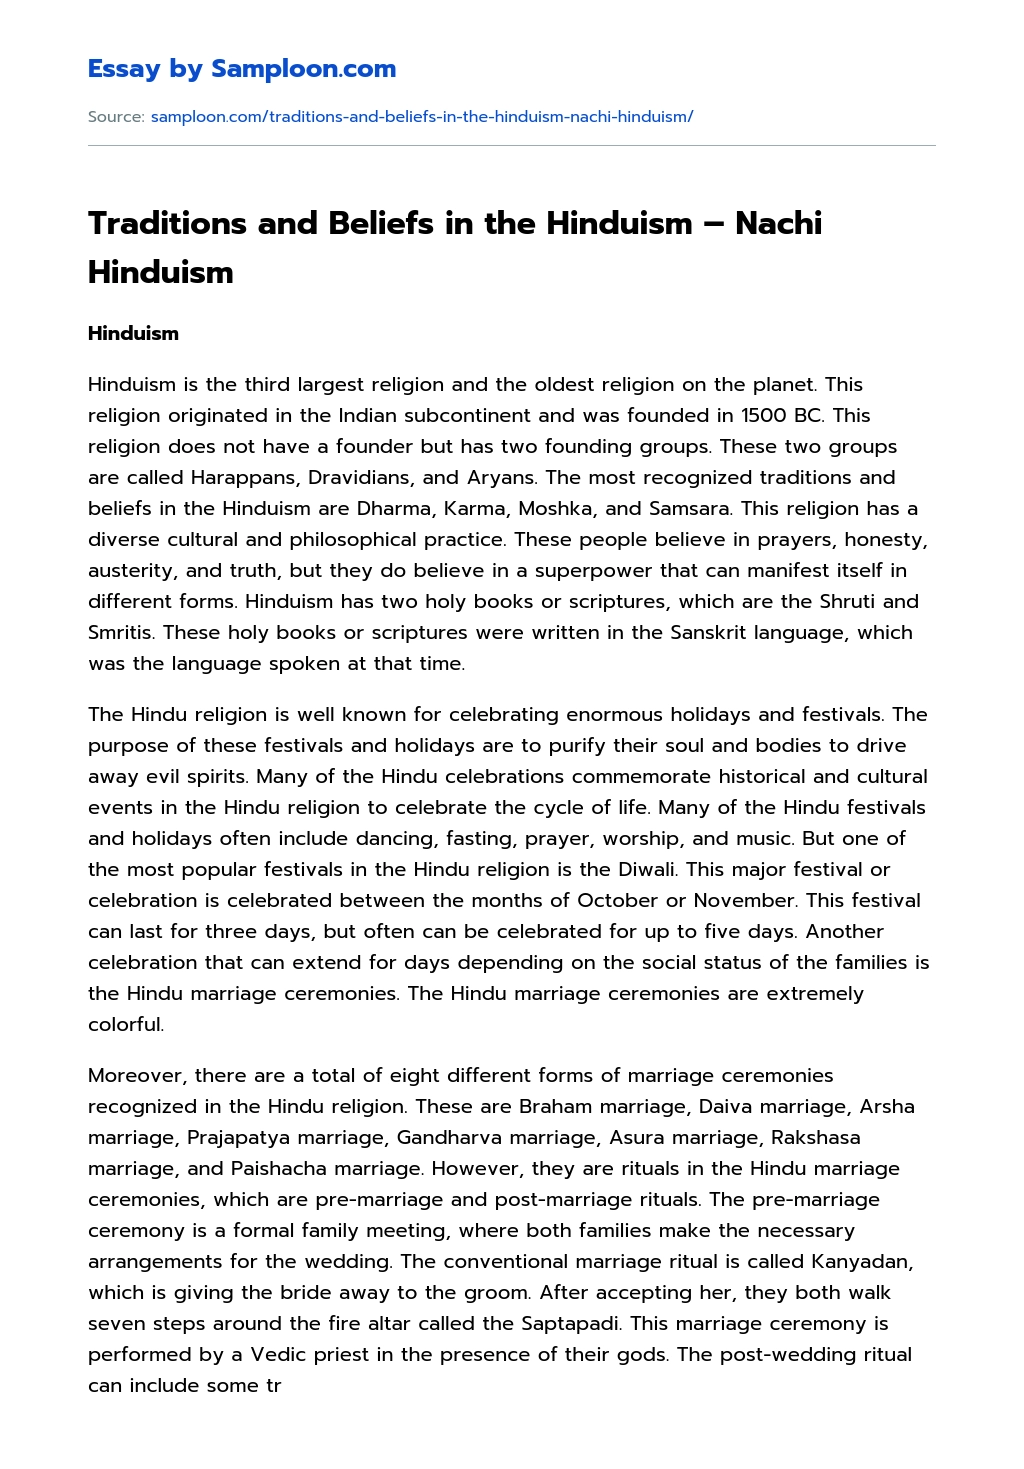 Traditions and Beliefs in the Hinduism – Nachi Hinduism essay